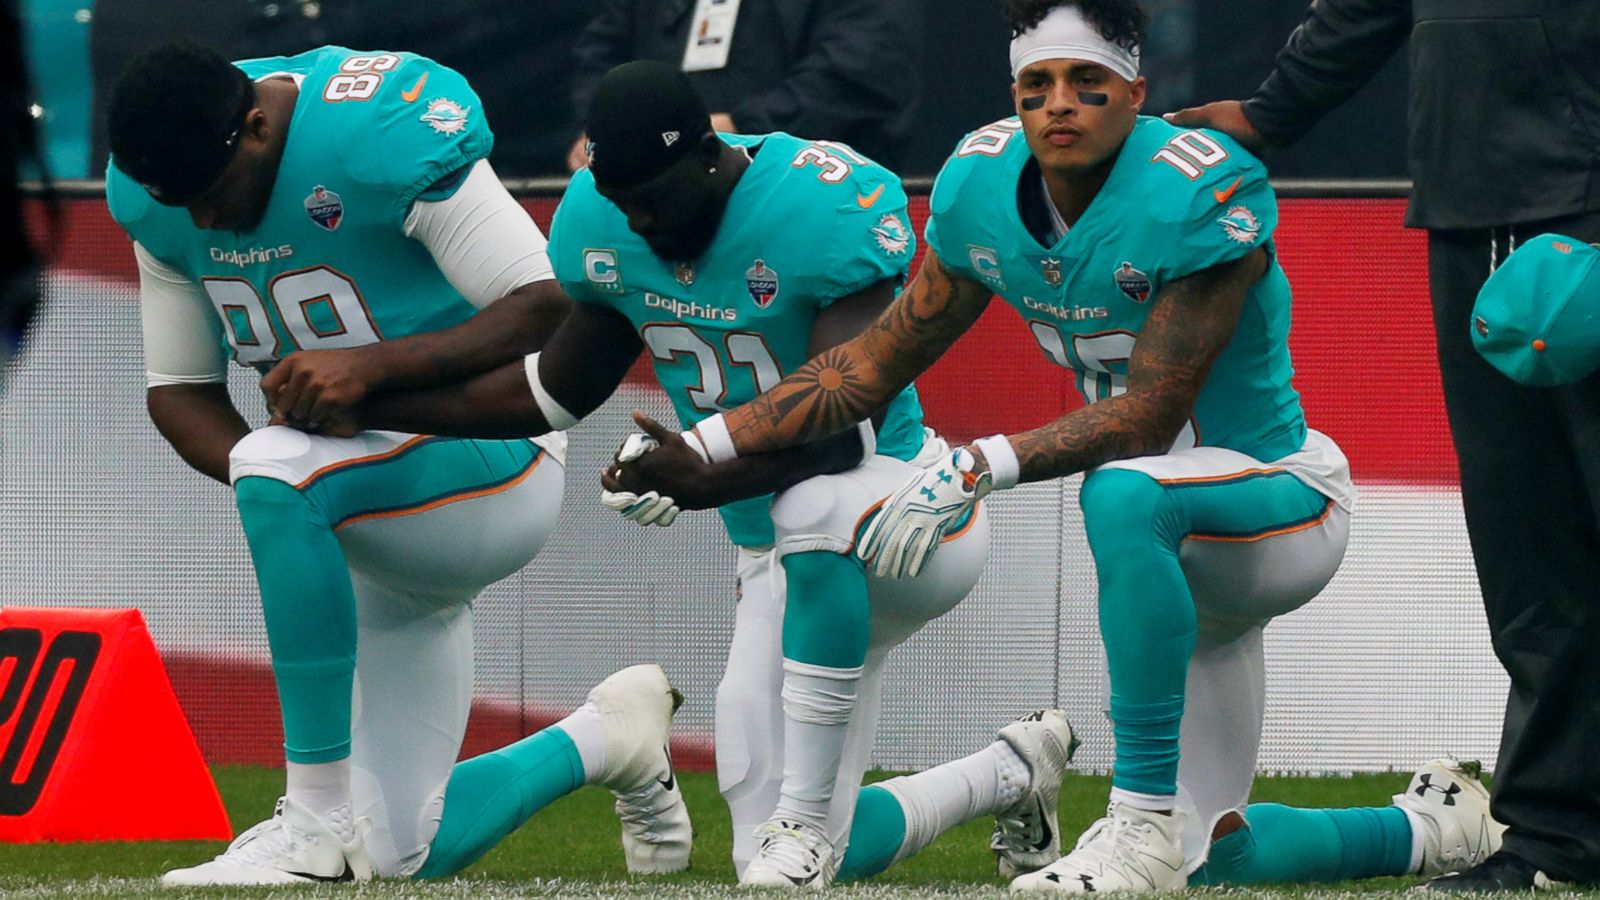 NFL and NFLPA working on anthem resolution after news leaked Miami Dolphins  would suspend protesters – The Denver Post